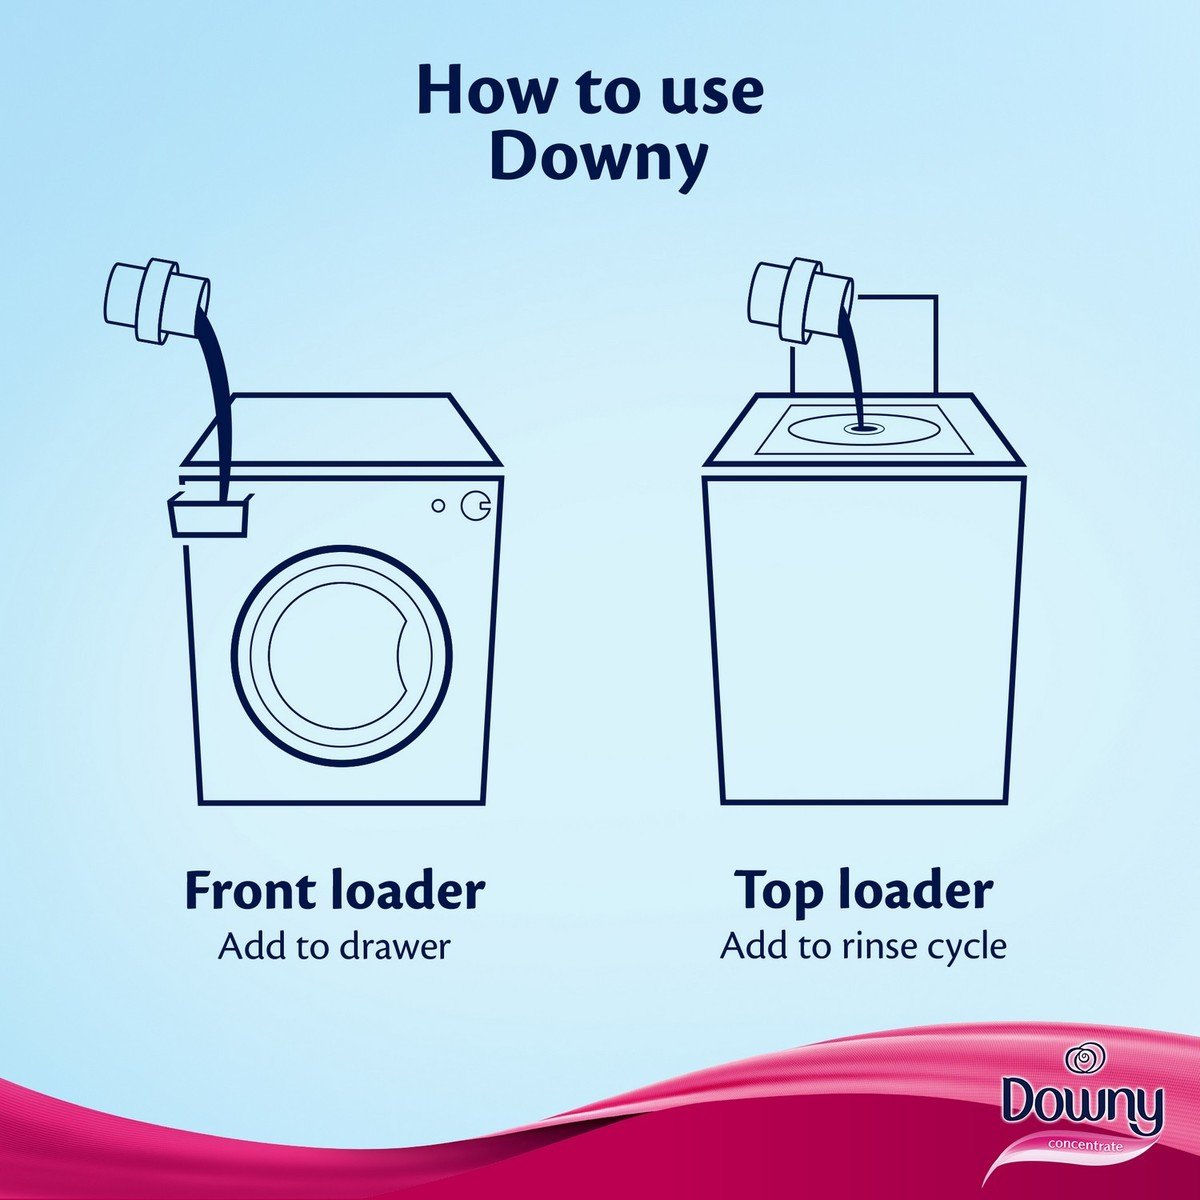 Downy Floral Breeze Concentrate Fabric Softener 1.5Litre